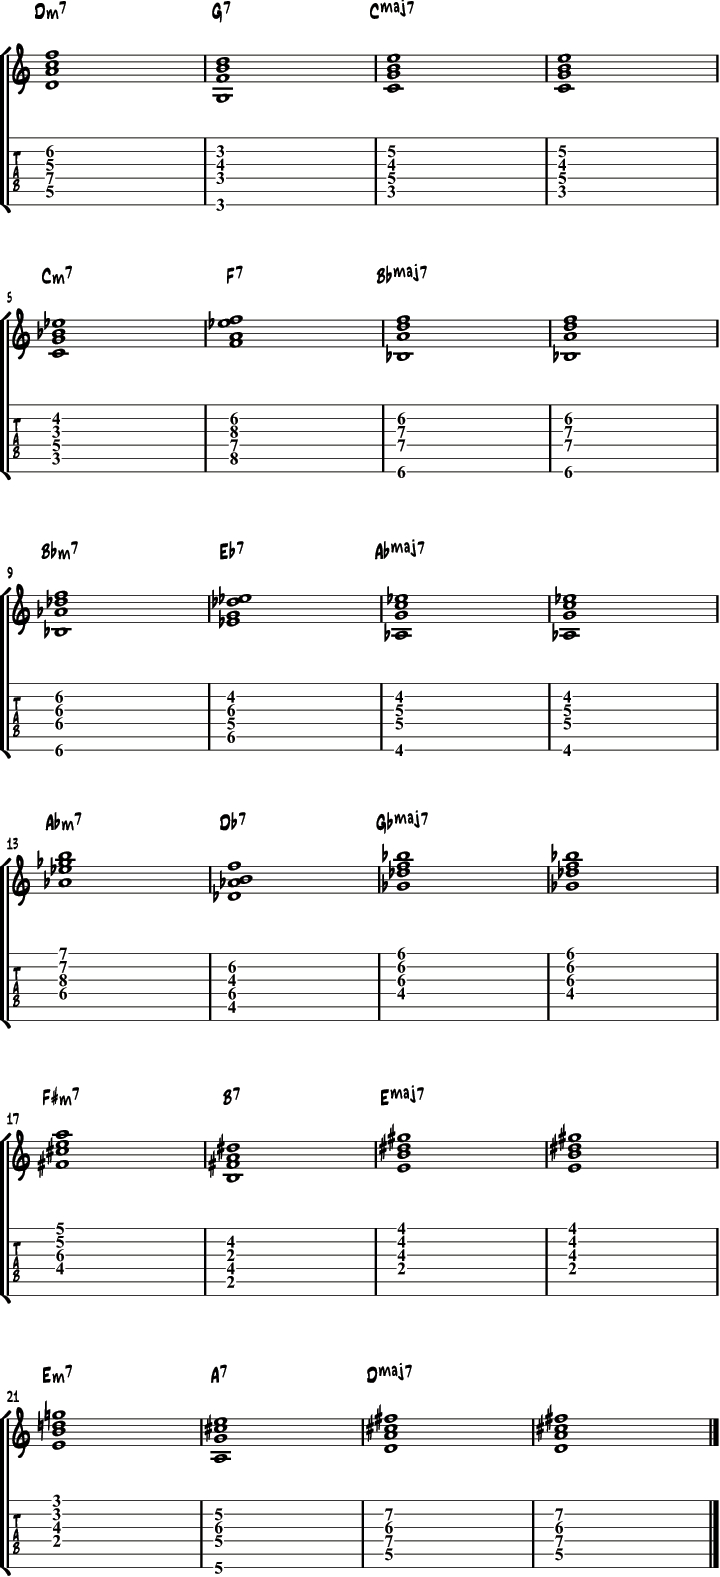 Guitar Chords Chart Top 17 Easy Jazz Guitar Chords For Beginners Chord Chart